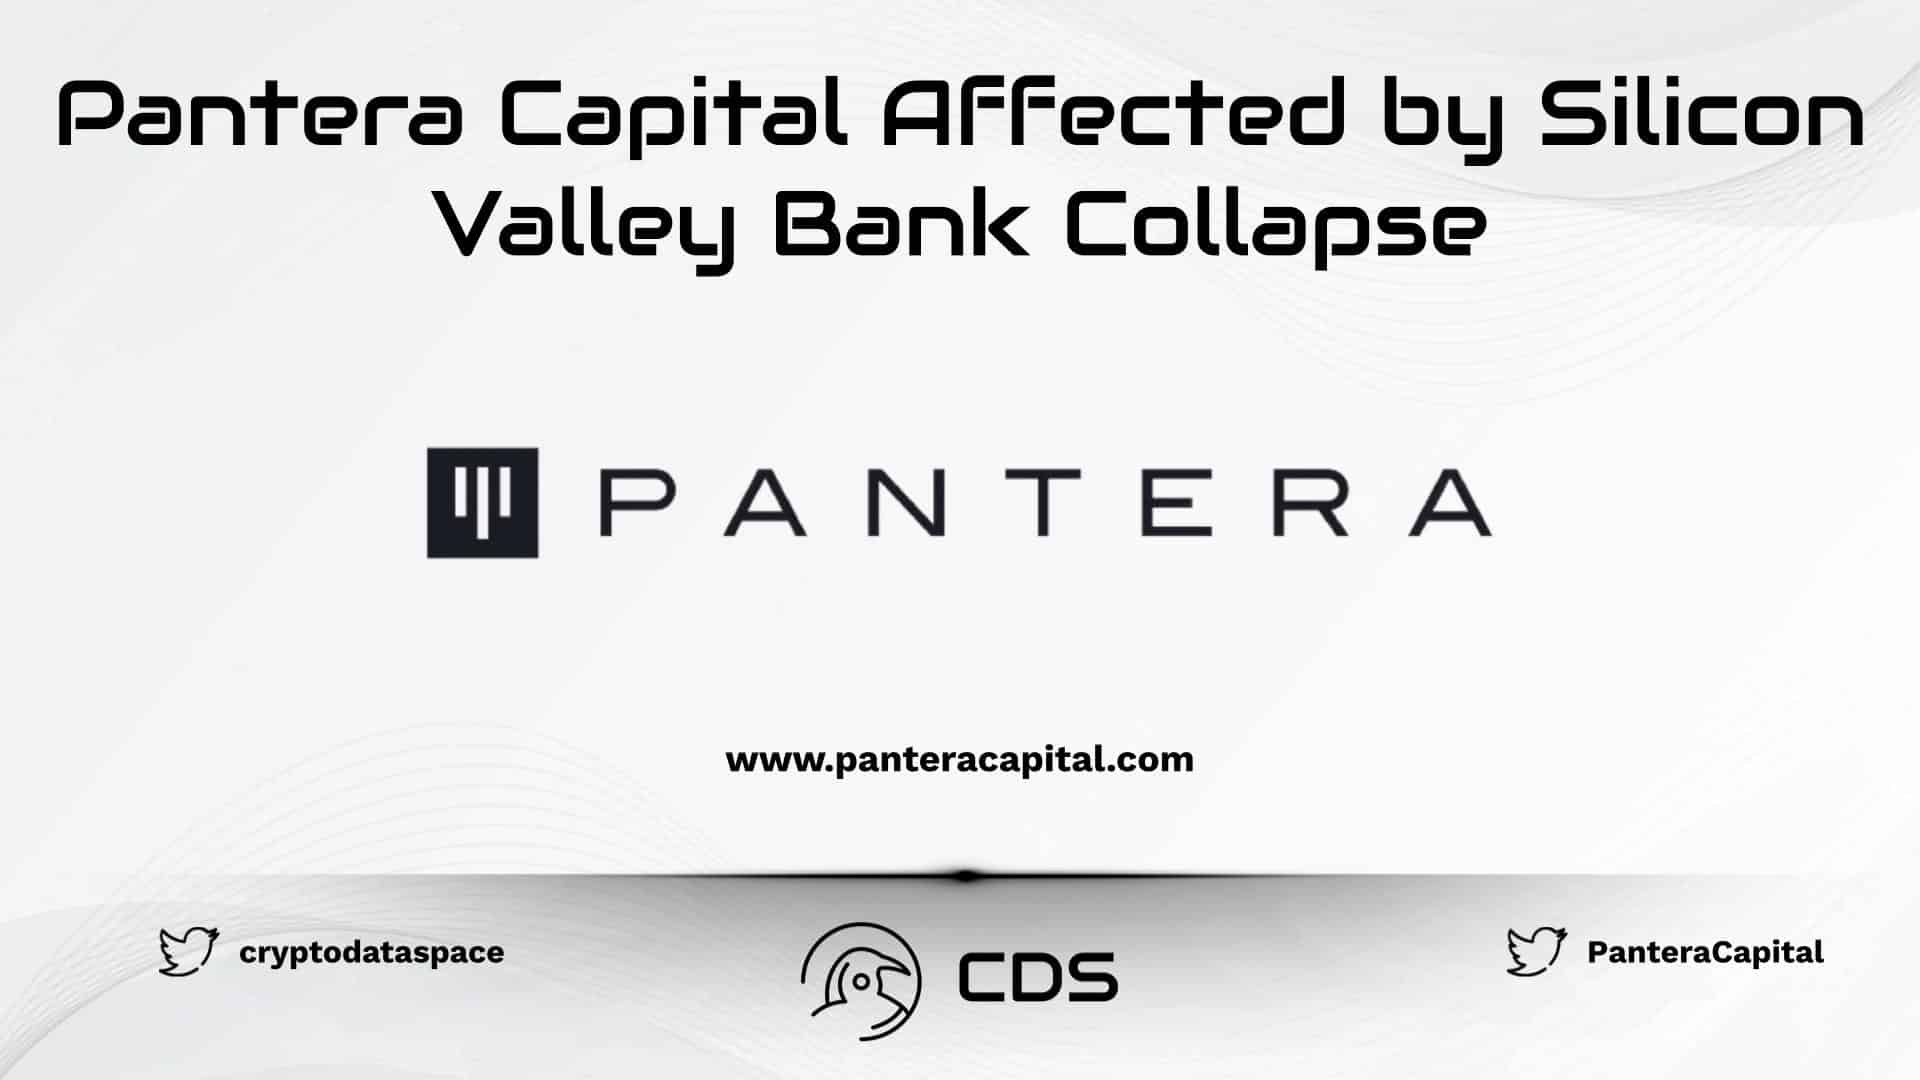 Pantera Capital Affected by Silicon Valley Bank Collapse